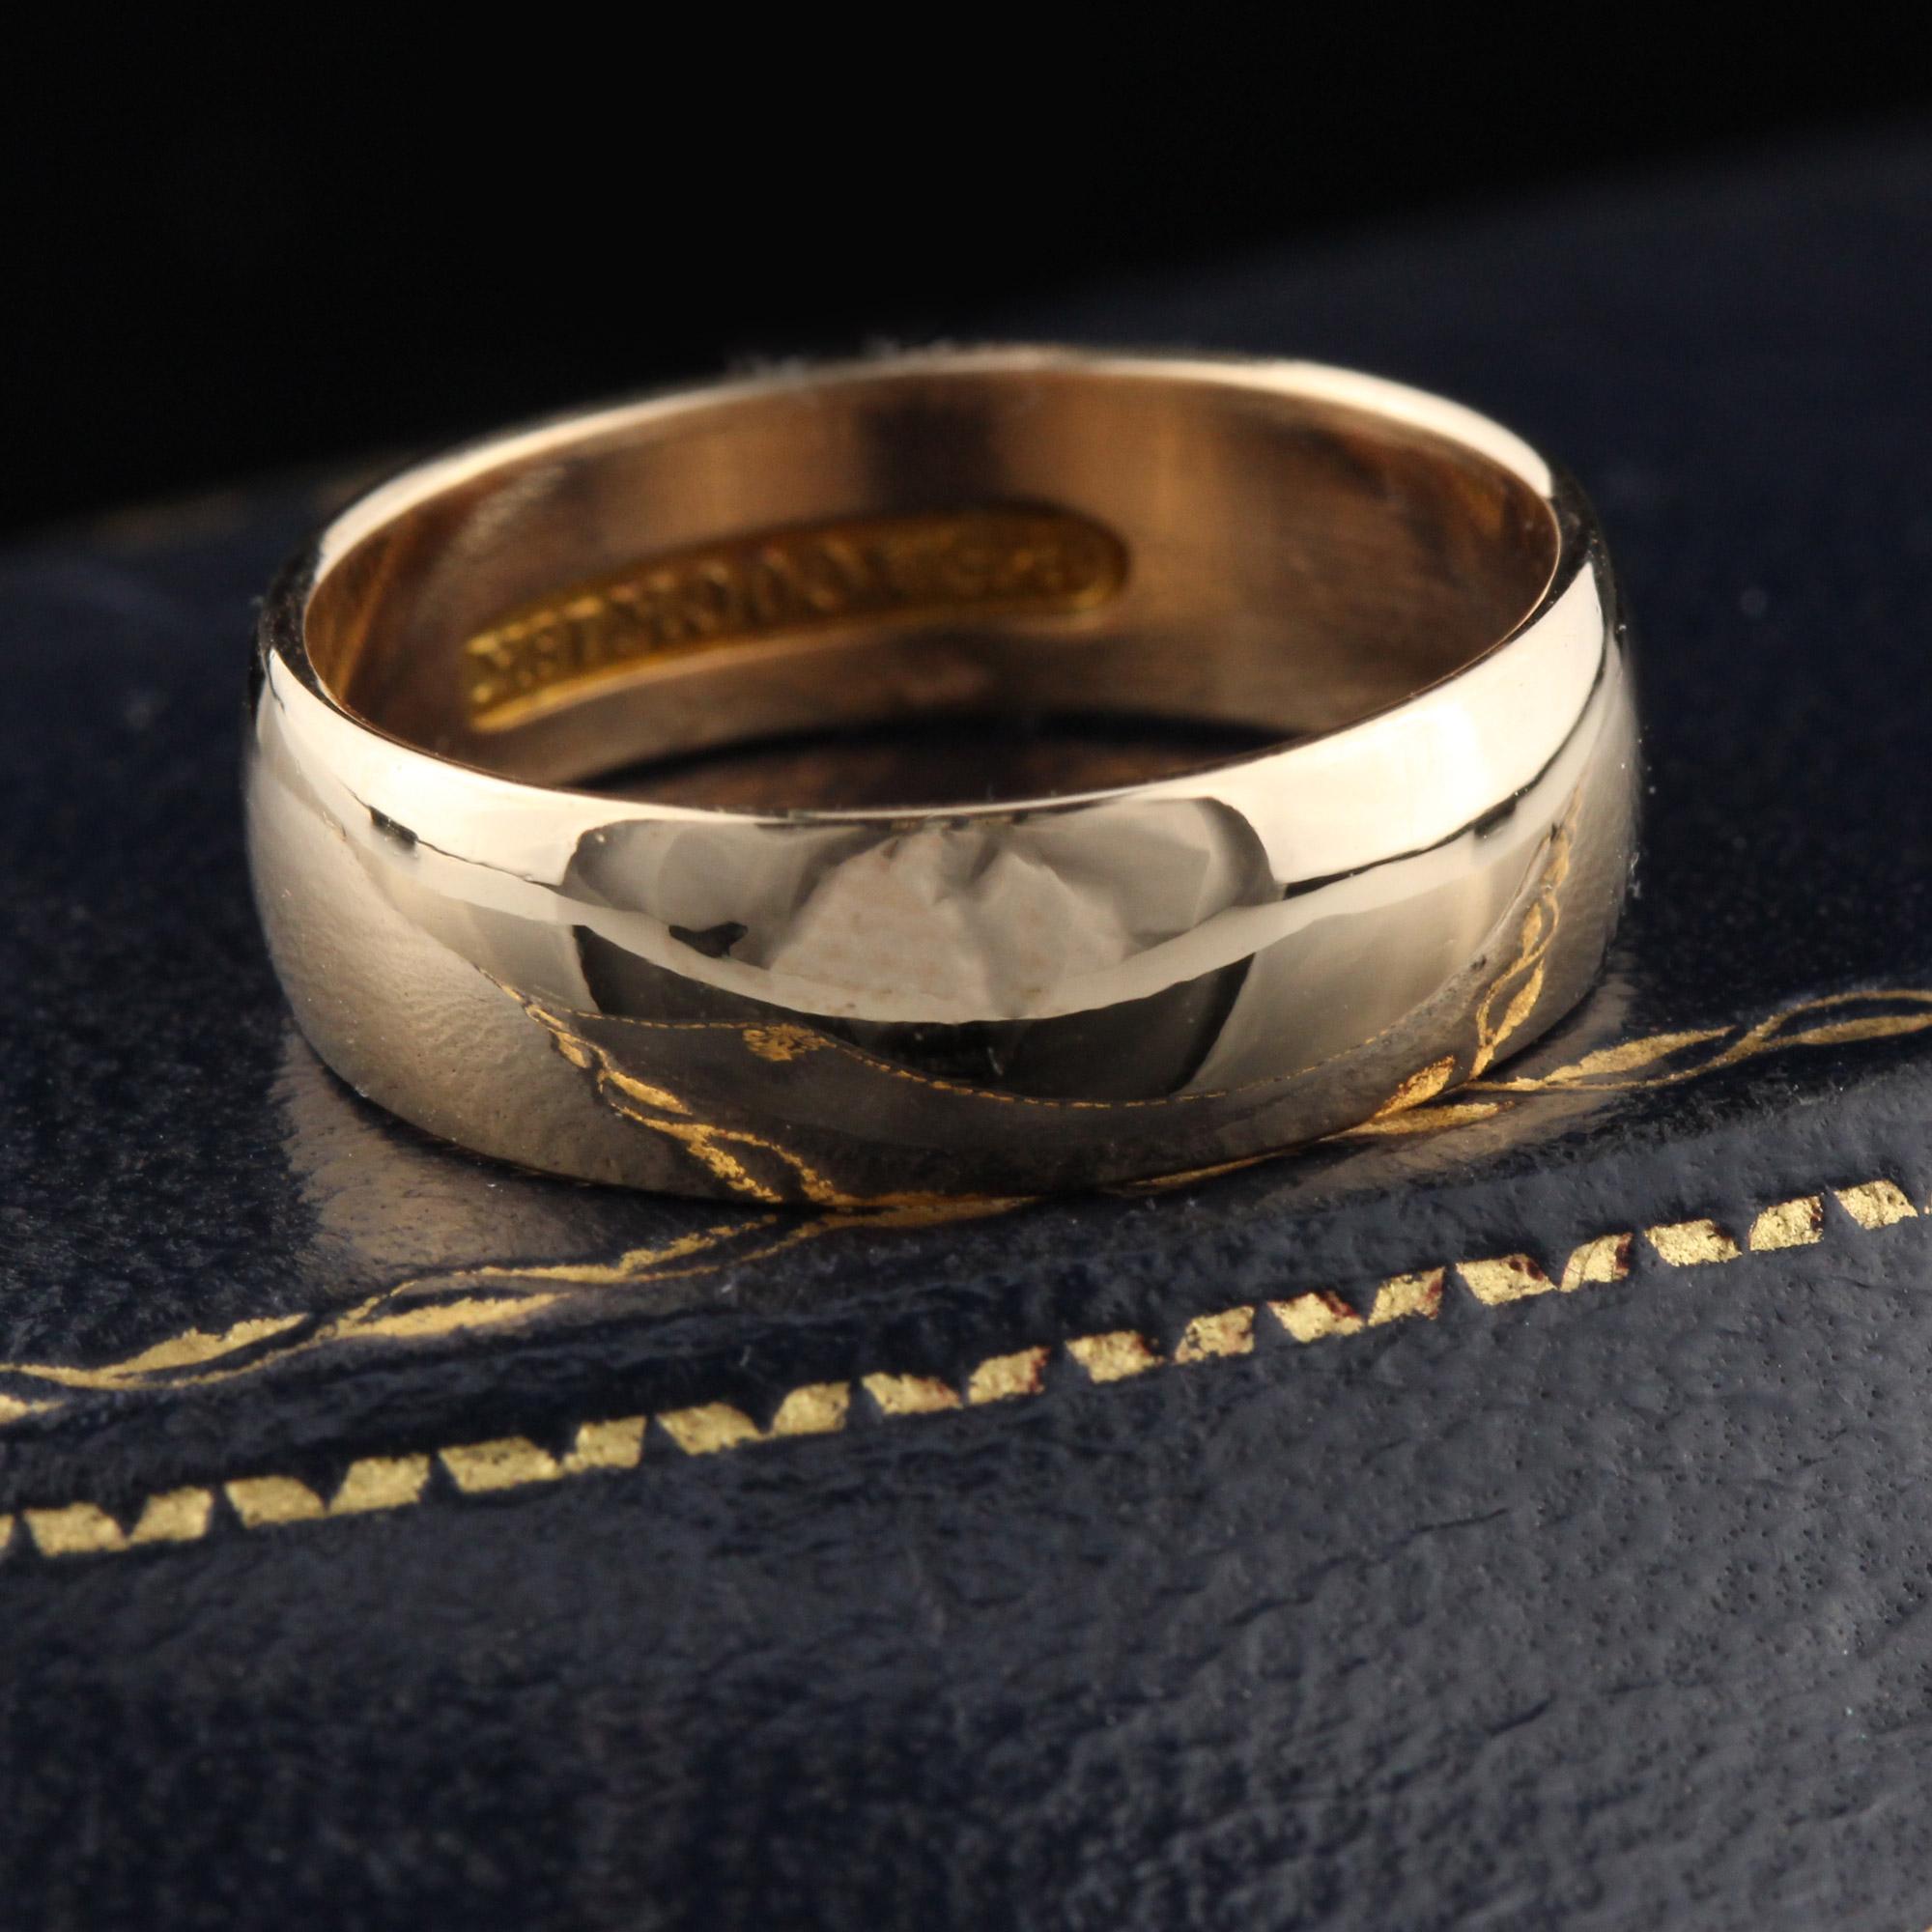 Classic vintage C.D.Peacock wedding band done in 18K Yellow Gold. Unisex!

#R0071

Metal: 18K Yellow Gold 

Weight: 4.8 grams

Ring Size: 6 3/4 

This ring can be sized for a $30 fee!

*Please note we cannot accept returns on sized